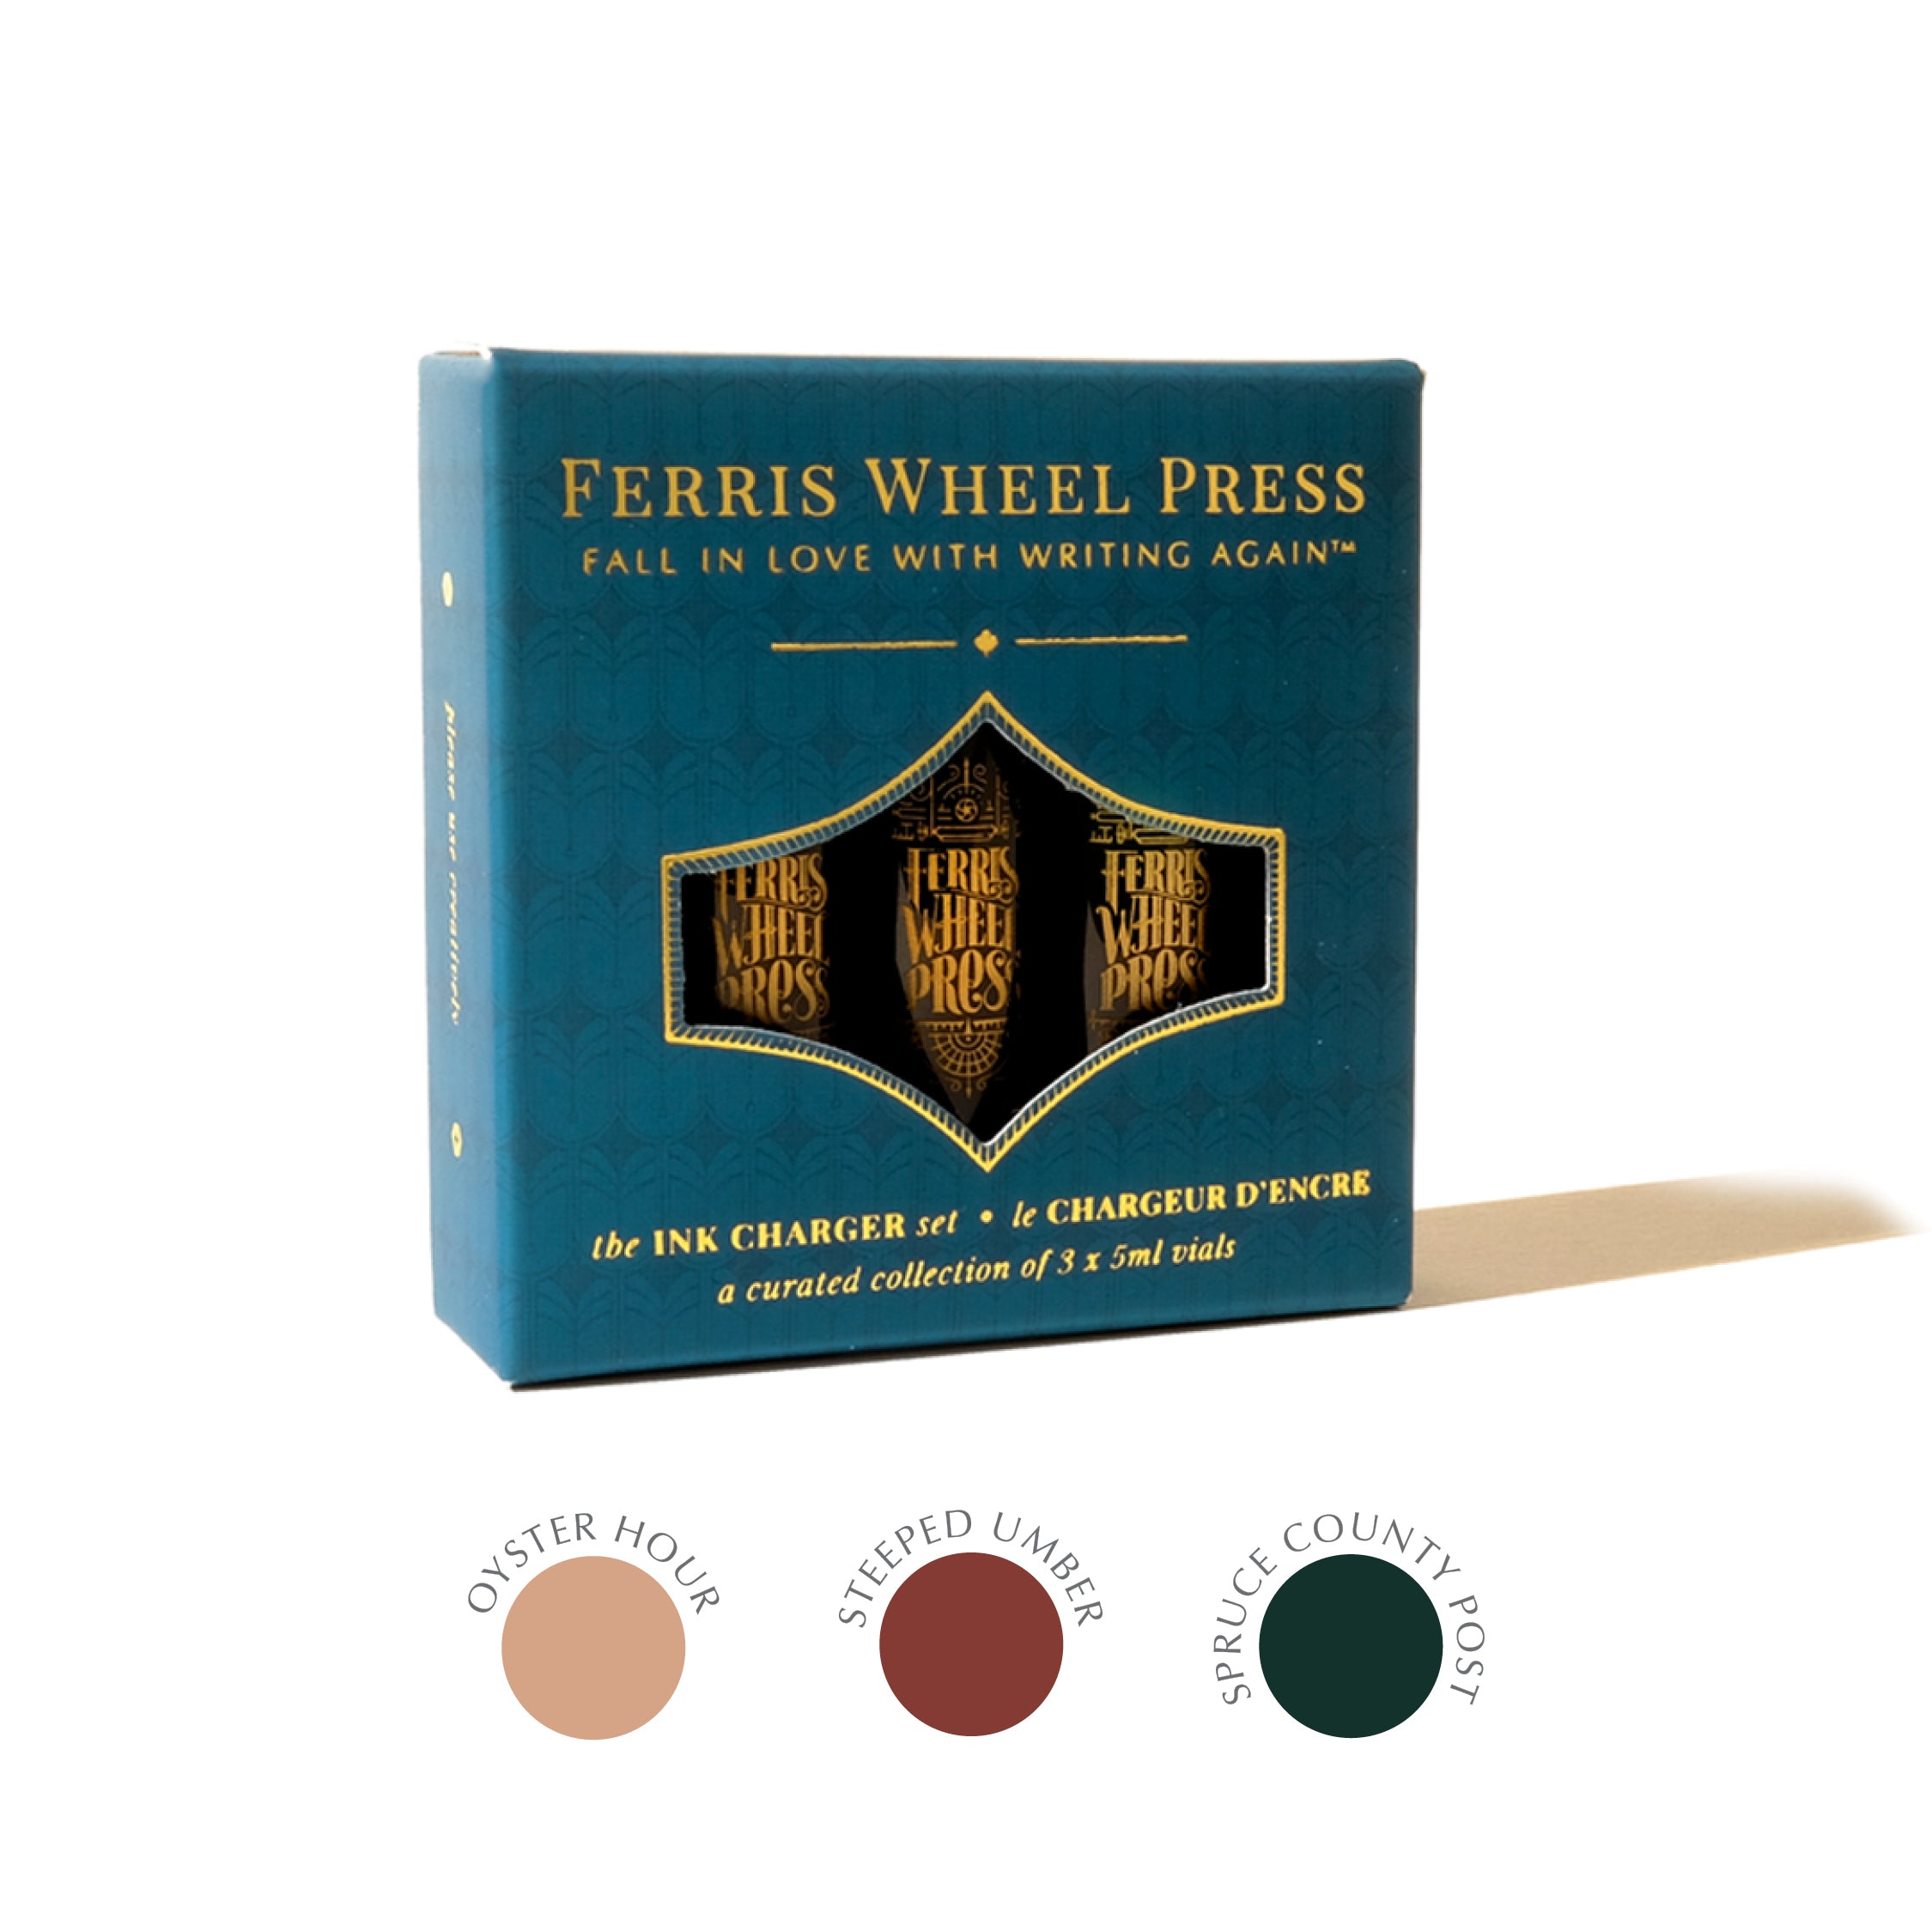 Ferris Wheel Press - Ink Charger Set - The Finer Things collection